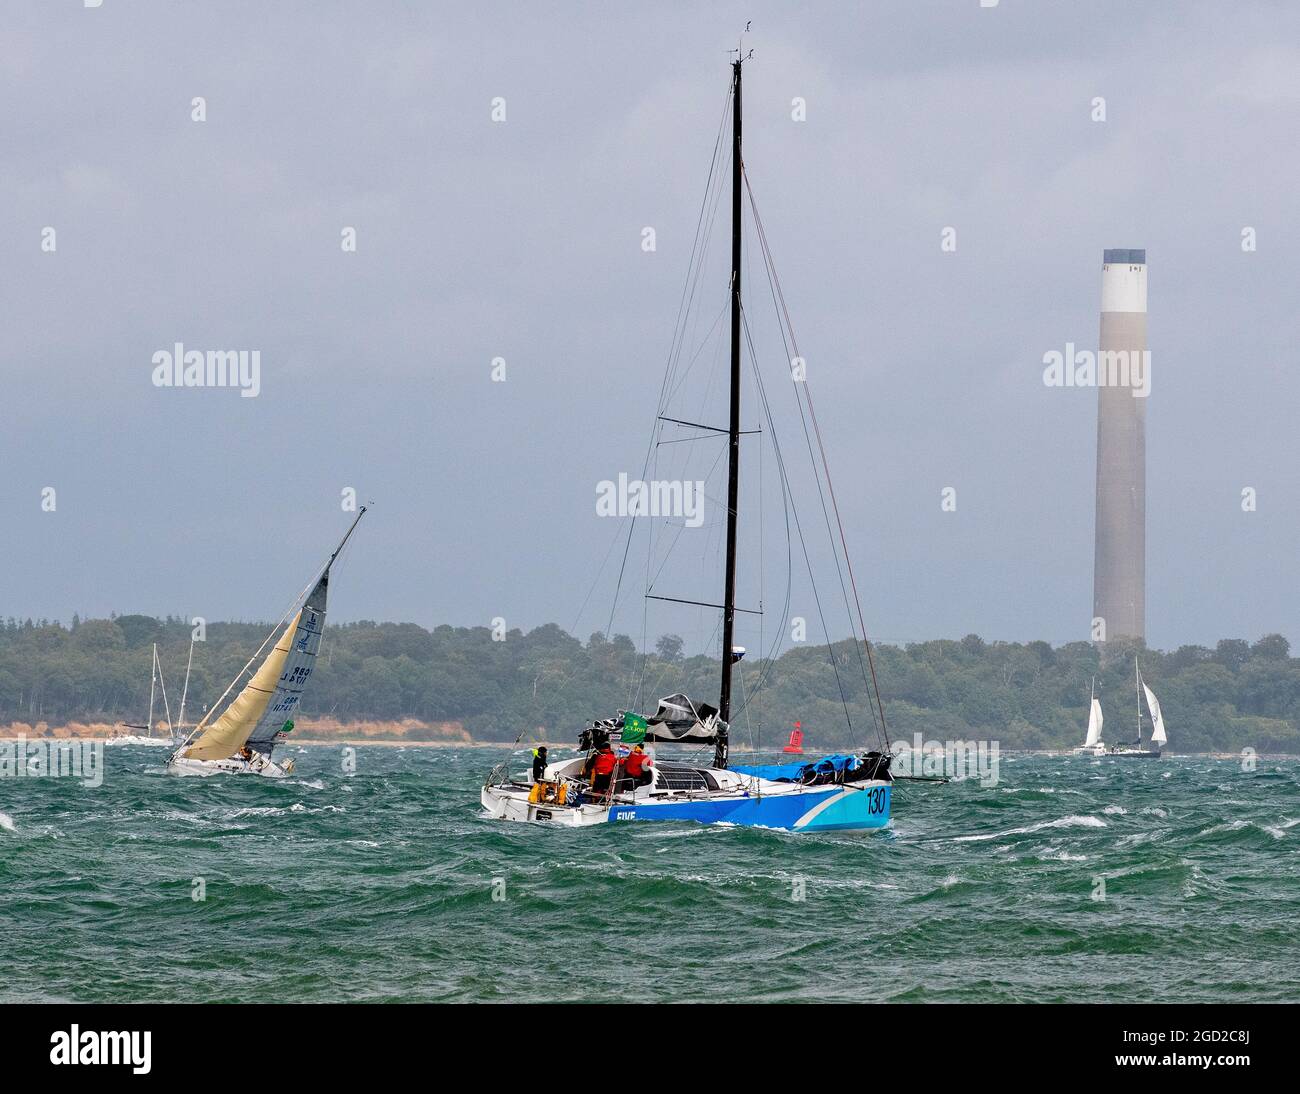 One of the first boats to retire and returning home on 8 August 2021 at the start of the Rolex Fastnet Race, Cowes, Isle of Wight, England Stock Photo